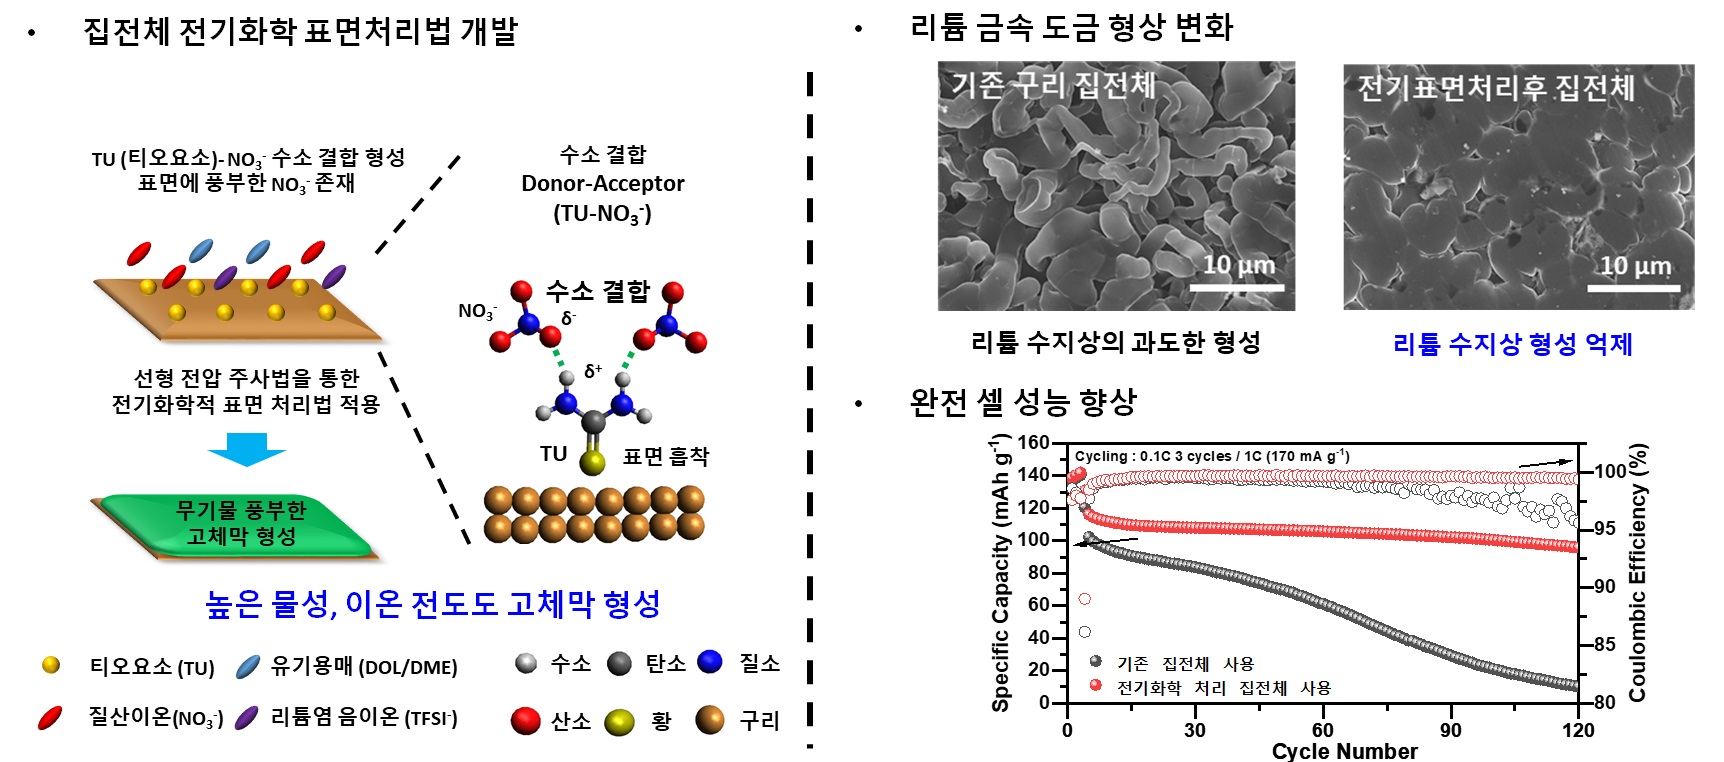 Professor KwangSup Eom's research team develops core technology for lithium metal batteries that last four times longer 이미지